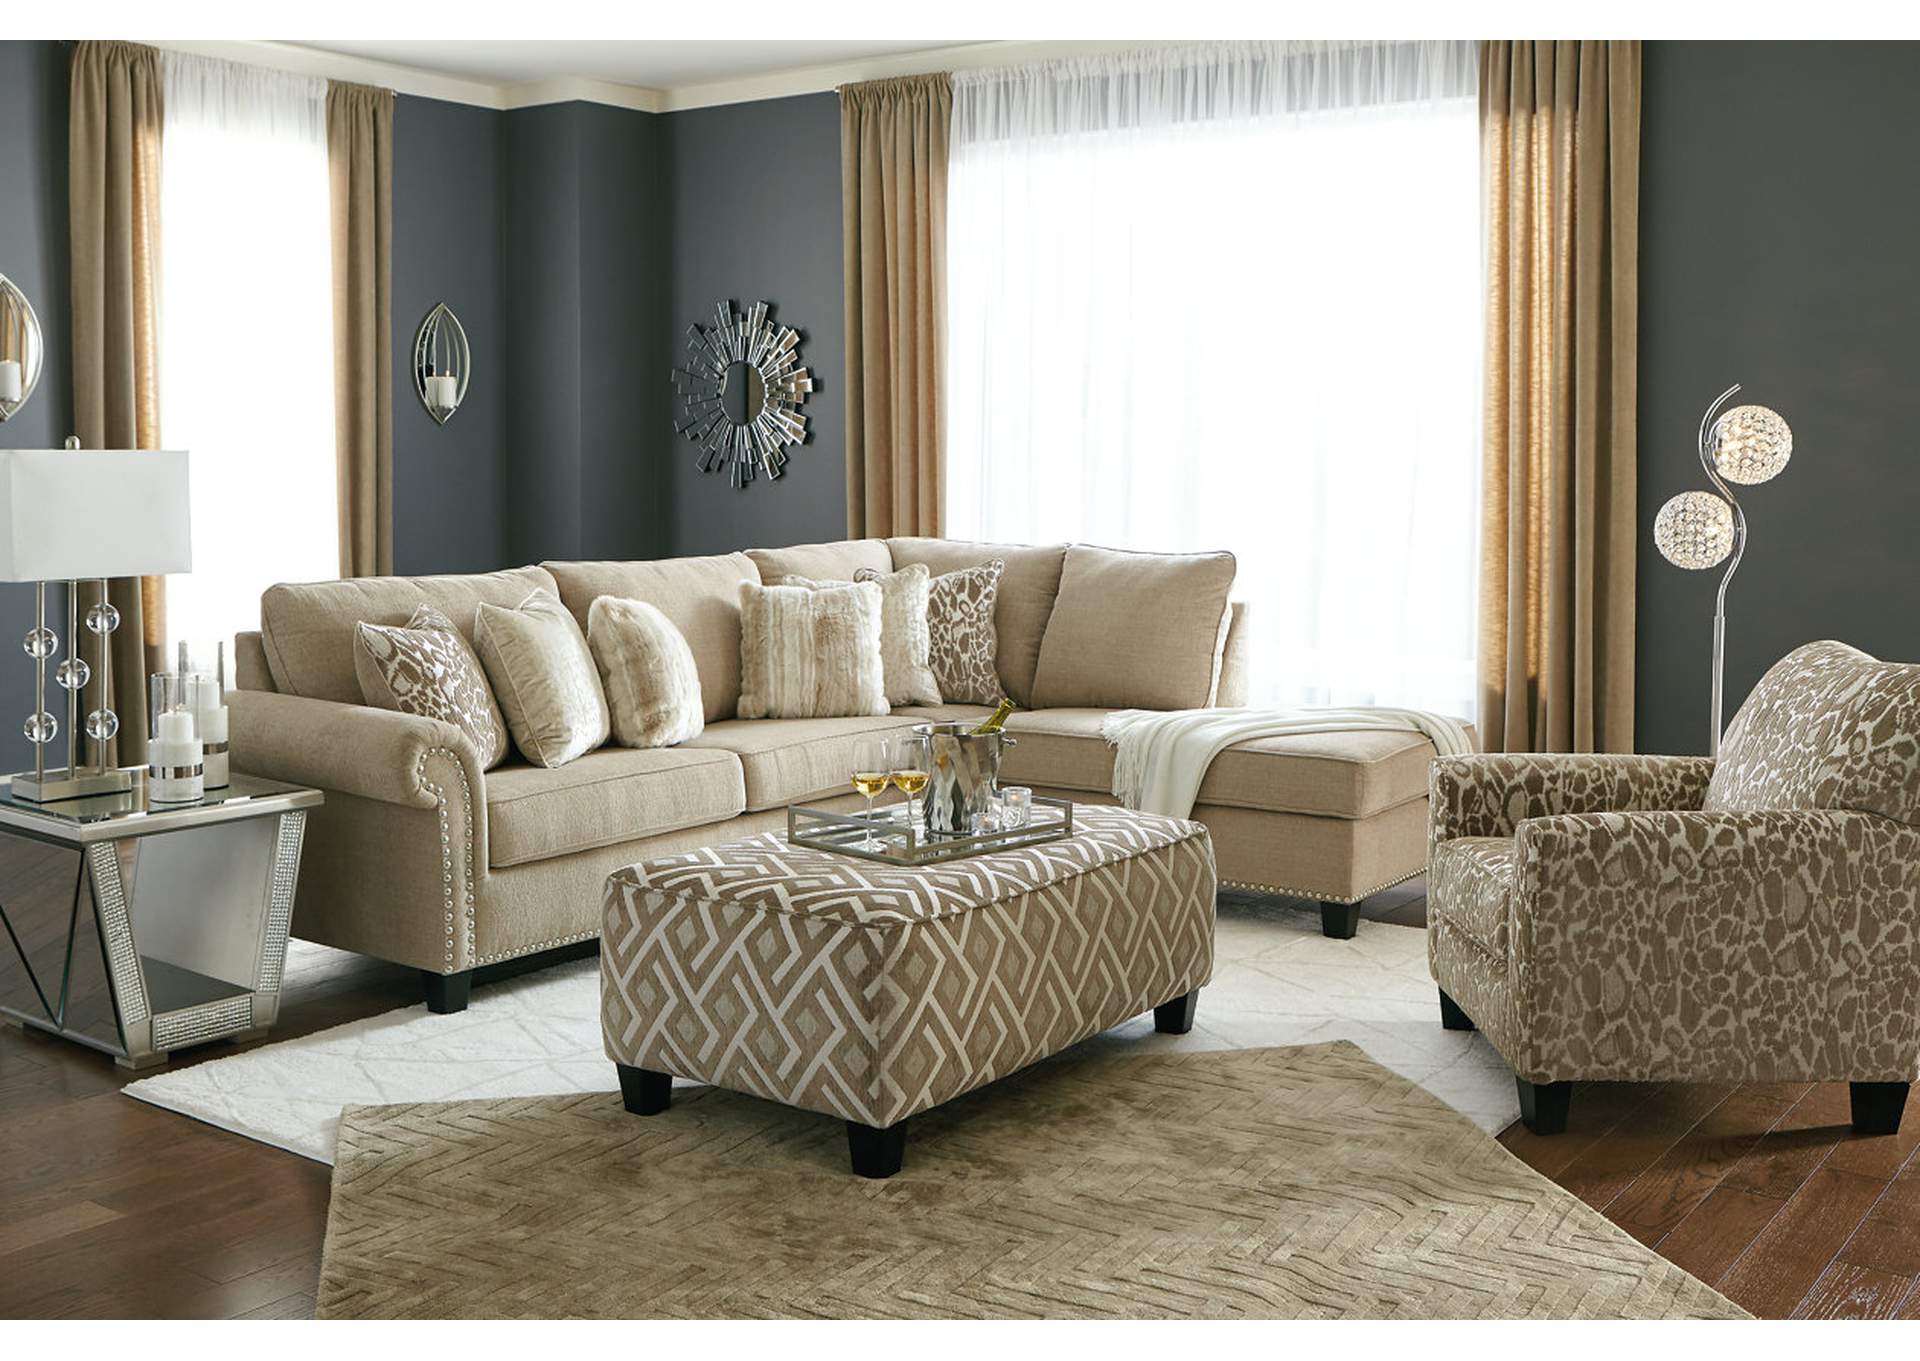 Dovemont 2-Piece Sectional with Chaise, Chair and Ottoman,Signature Design By Ashley